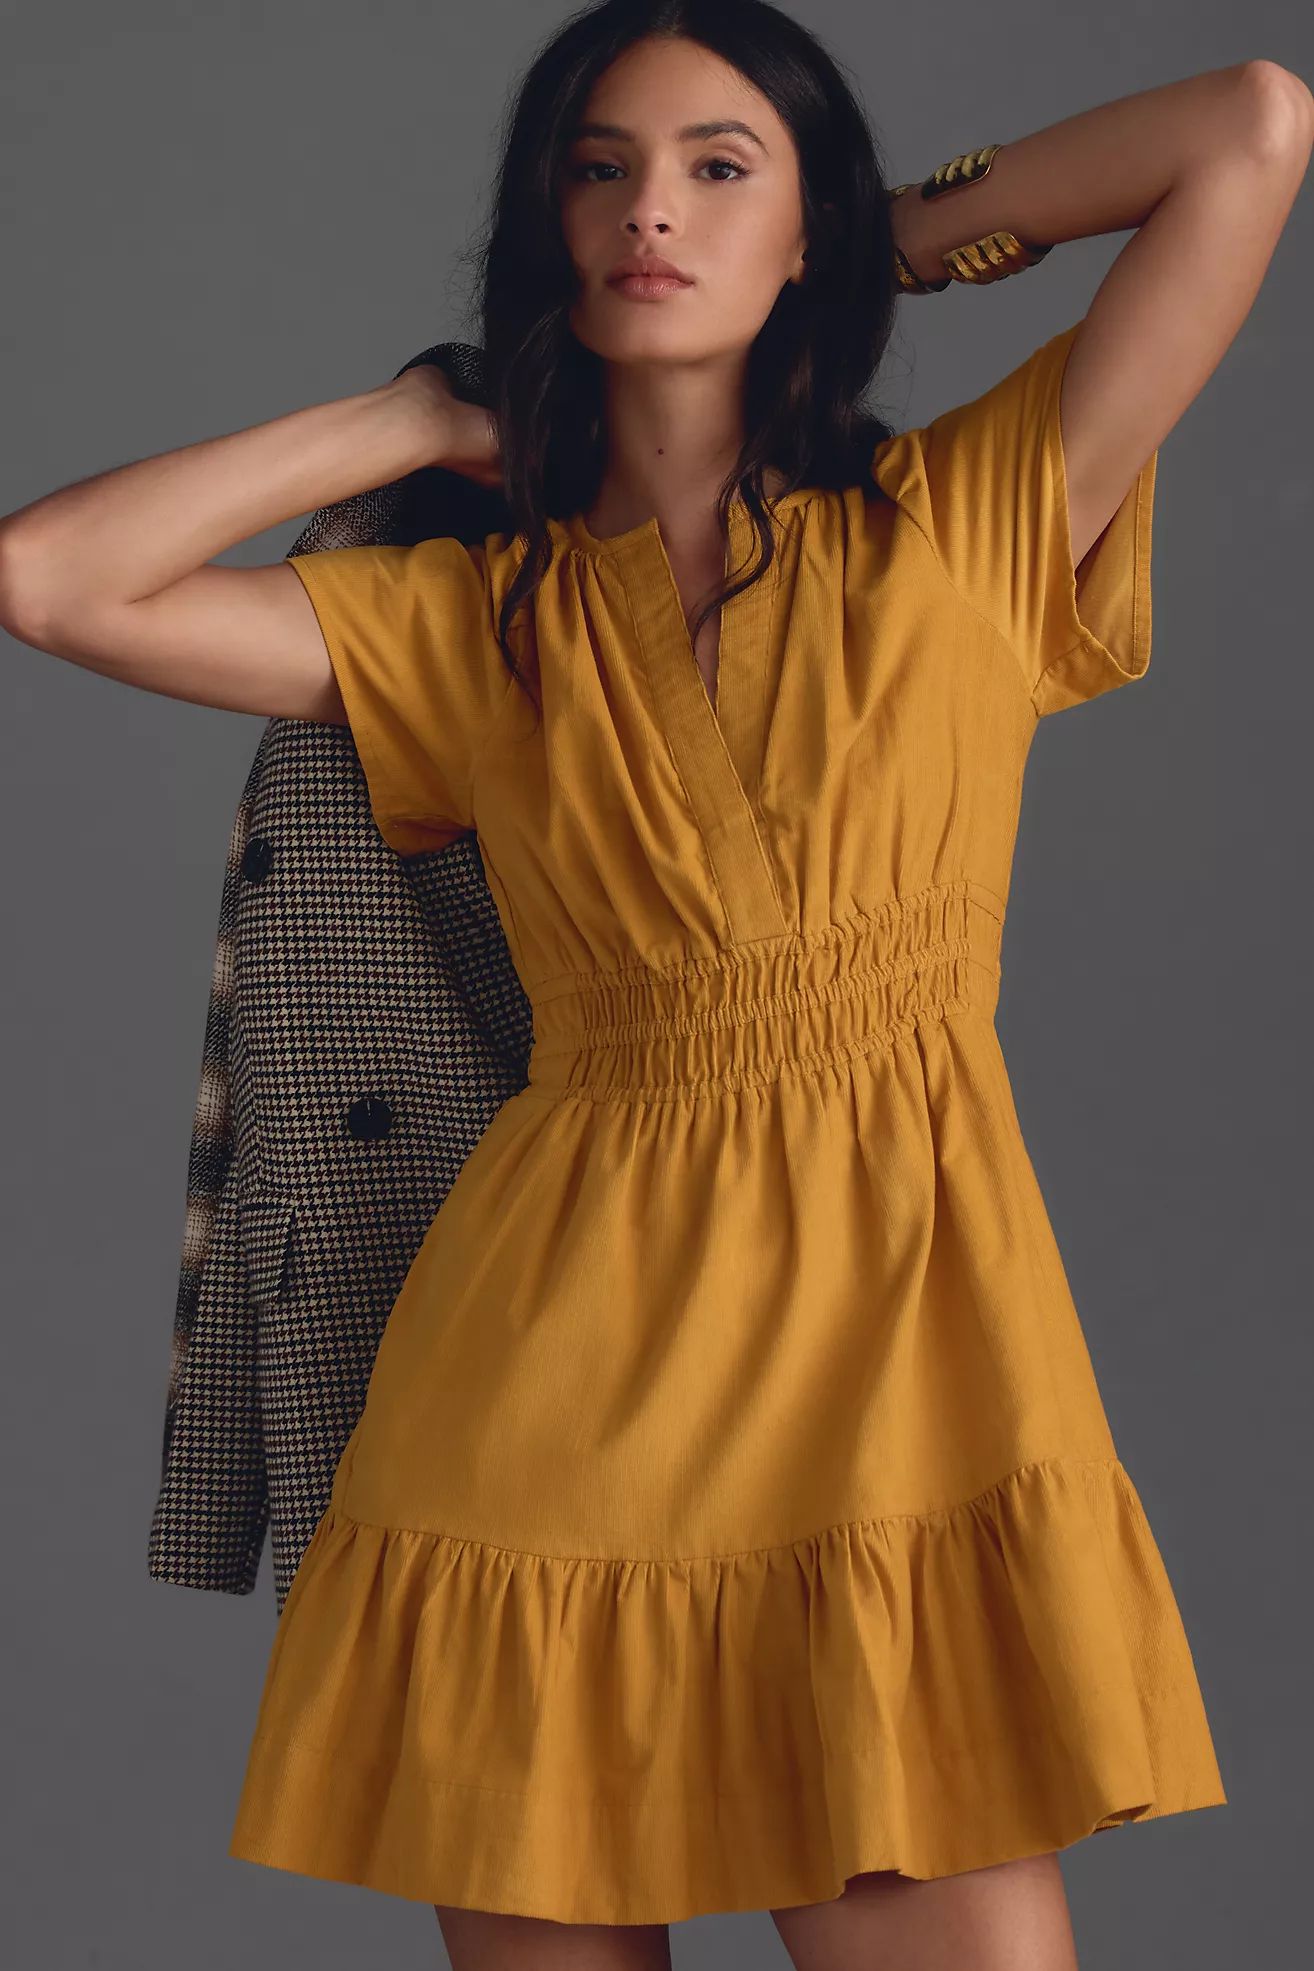 & they're an extra 40% off! | Anthropologie (US)